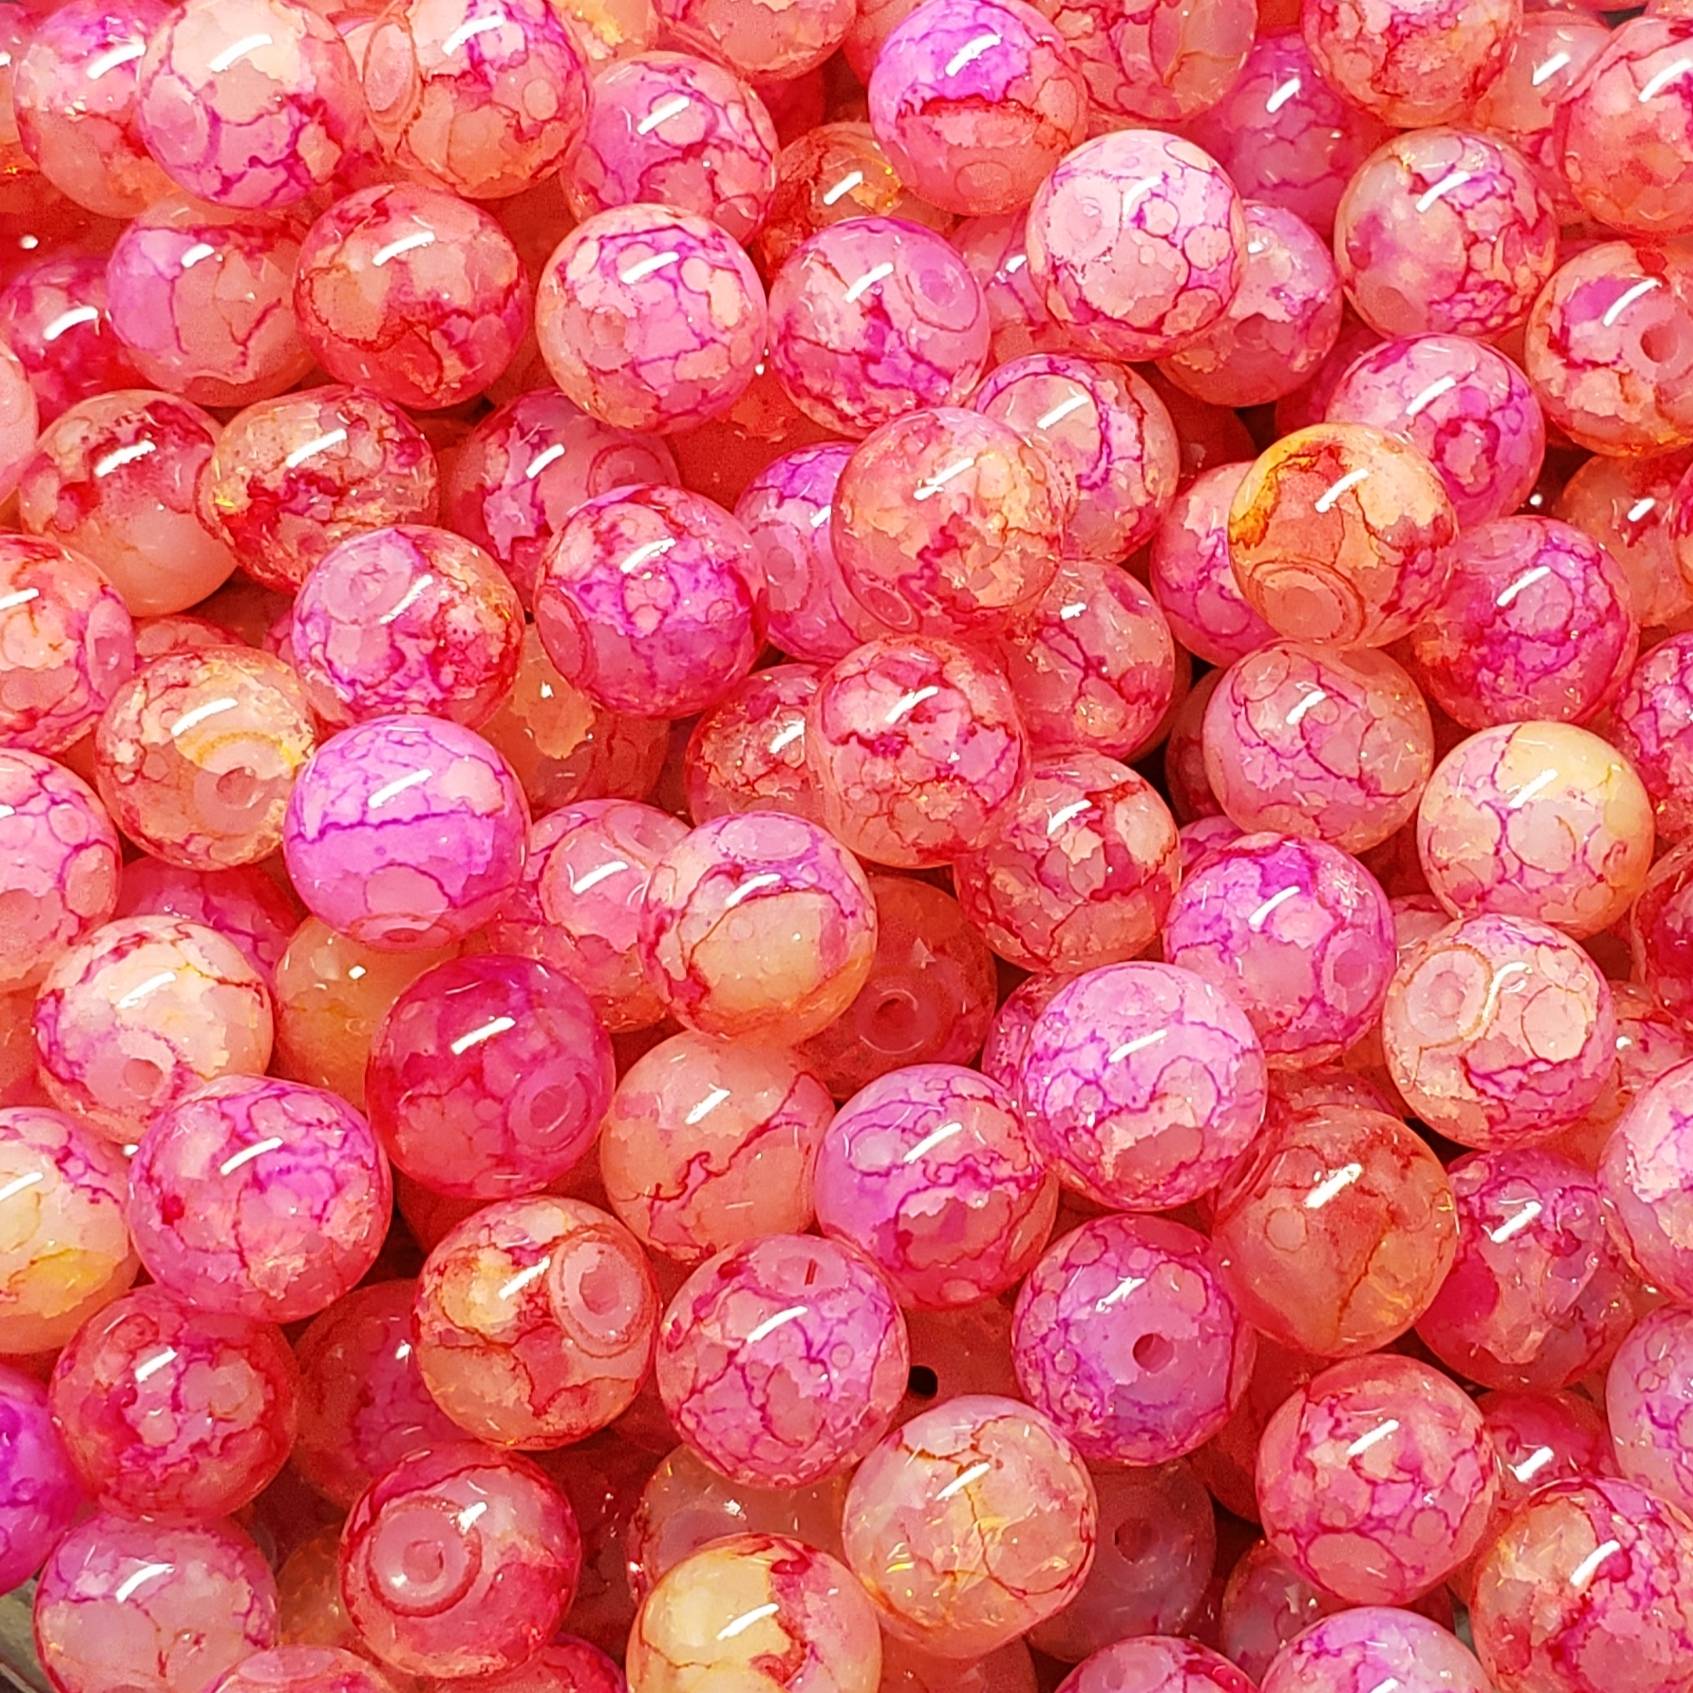 Creek Candy Beads | Outdoor Sporting Goods Store